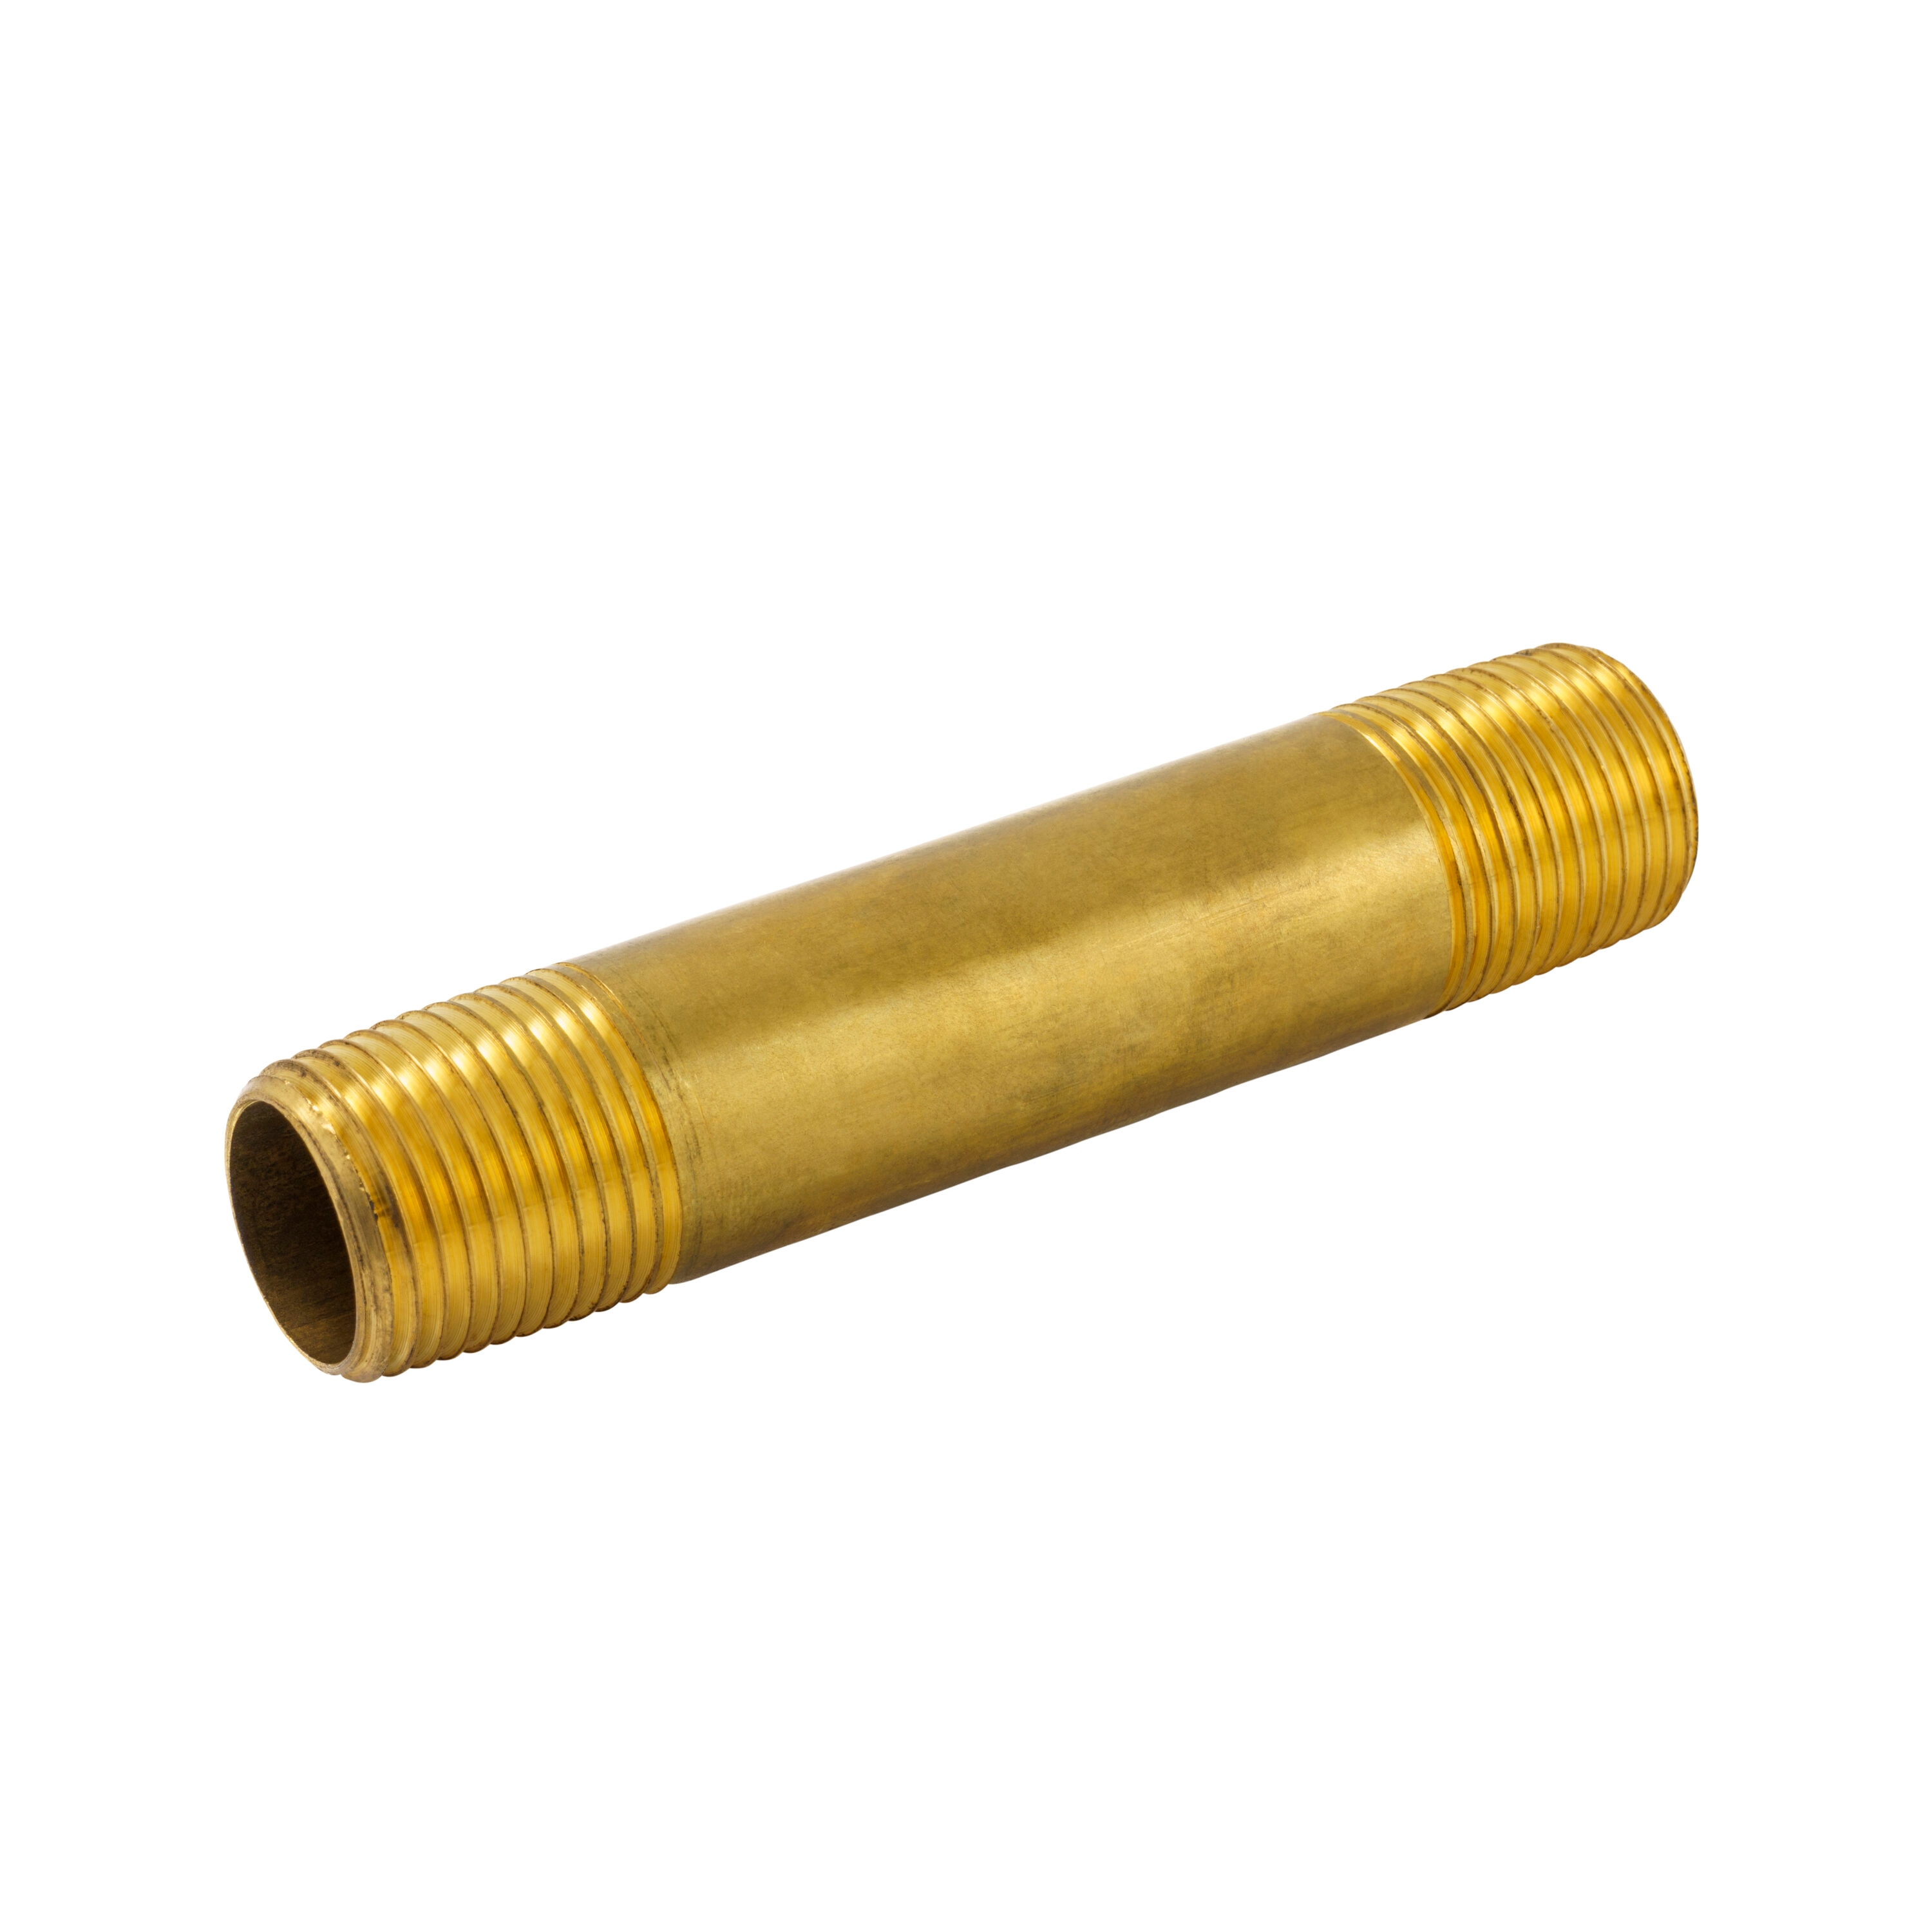 Brass hex nipple pipe fittings for chemicals, flammable gases, slurries